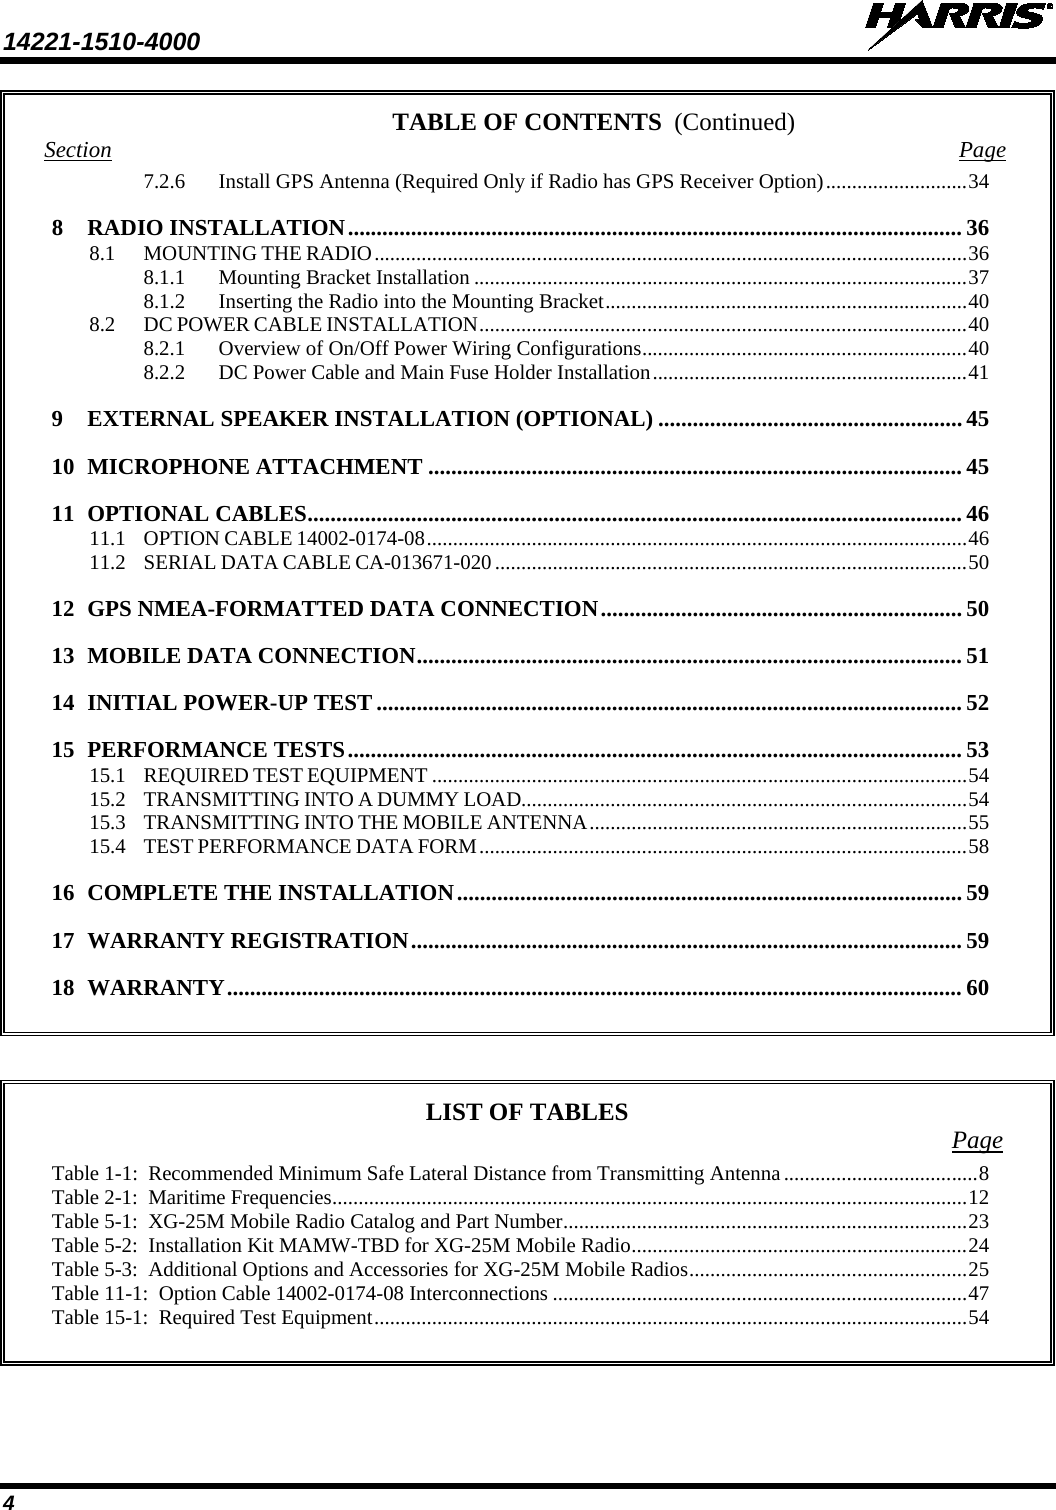 14221-1510-4000   4 TABLE OF CONTENTS Section Page 7.2.6 Install GPS Antenna (Required Only if Radio has GPS Receiver Option) ........................... 34 8 RADIO INSTALLATION ........................................................................................................... 36 8.1 MOUNTING THE RADIO ................................................................................................................. 36 8.1.1 Mounting Bracket Installation .............................................................................................. 37 8.1.2 Inserting the Radio into the Mounting Bracket ..................................................................... 40 8.2 DC POWER CABLE INSTALLATION ............................................................................................. 40 8.2.1 Overview of On/Off Power Wiring Configurations .............................................................. 40 8.2.2 DC Power Cable and Main Fuse Holder Installation ............................................................ 41 9 EXTERNAL SPEAKER INSTALLATION (OPTIONAL) ..................................................... 45 10 MICROPHONE ATTACHMENT ............................................................................................. 45 11 OPTIONAL CABLES .................................................................................................................. 46 11.1 OPTION CABLE 14002-0174-08 ....................................................................................................... 46 11.2 SERIAL DATA CABLE CA-013671-020 .......................................................................................... 50 12 GPS NMEA-FORMATTED DATA CONNECTION ............................................................... 50 13 MOBILE DATA CONNECTION ............................................................................................... 51 14 INITIAL POWER-UP TEST ...................................................................................................... 52 15 PERFORMANCE TESTS ........................................................................................................... 53 15.1 REQUIRED TEST EQUIPMENT ...................................................................................................... 54 15.2 TRANSMITTING INTO A DUMMY LOAD..................................................................................... 54 15.3 TRANSMITTING INTO THE MOBILE ANTENNA ........................................................................ 55 15.4 TEST PERFORMANCE DATA FORM ............................................................................................. 58 16 COMPLETE THE INSTALLATION ........................................................................................ 59 17 WARRANTY REGISTRATION ................................................................................................ 59 18 WARRANTY ................................................................................................................................ 60     LIST OF TABLES Page Table 1-1:  Recommended Minimum Safe Lateral Distance from Transmitting Antenna ..................................... 8 Table 2-1:  Maritime Frequencies ......................................................................................................................... 12 Table 5-1:  XG-25M Mobile Radio Catalog and Part Number ............................................................................. 23 Table 5-2:  Installation Kit MAMW-TBD for XG-25M Mobile Radio ................................................................ 24 Table 5-3:  Additional Options and Accessories for XG-25M Mobile Radios ..................................................... 25 Table 11-1:  Option Cable 14002-0174-08 Interconnections ............................................................................... 47 Table 15-1:  Required Test Equipment ................................................................................................................. 54   (Continued) 